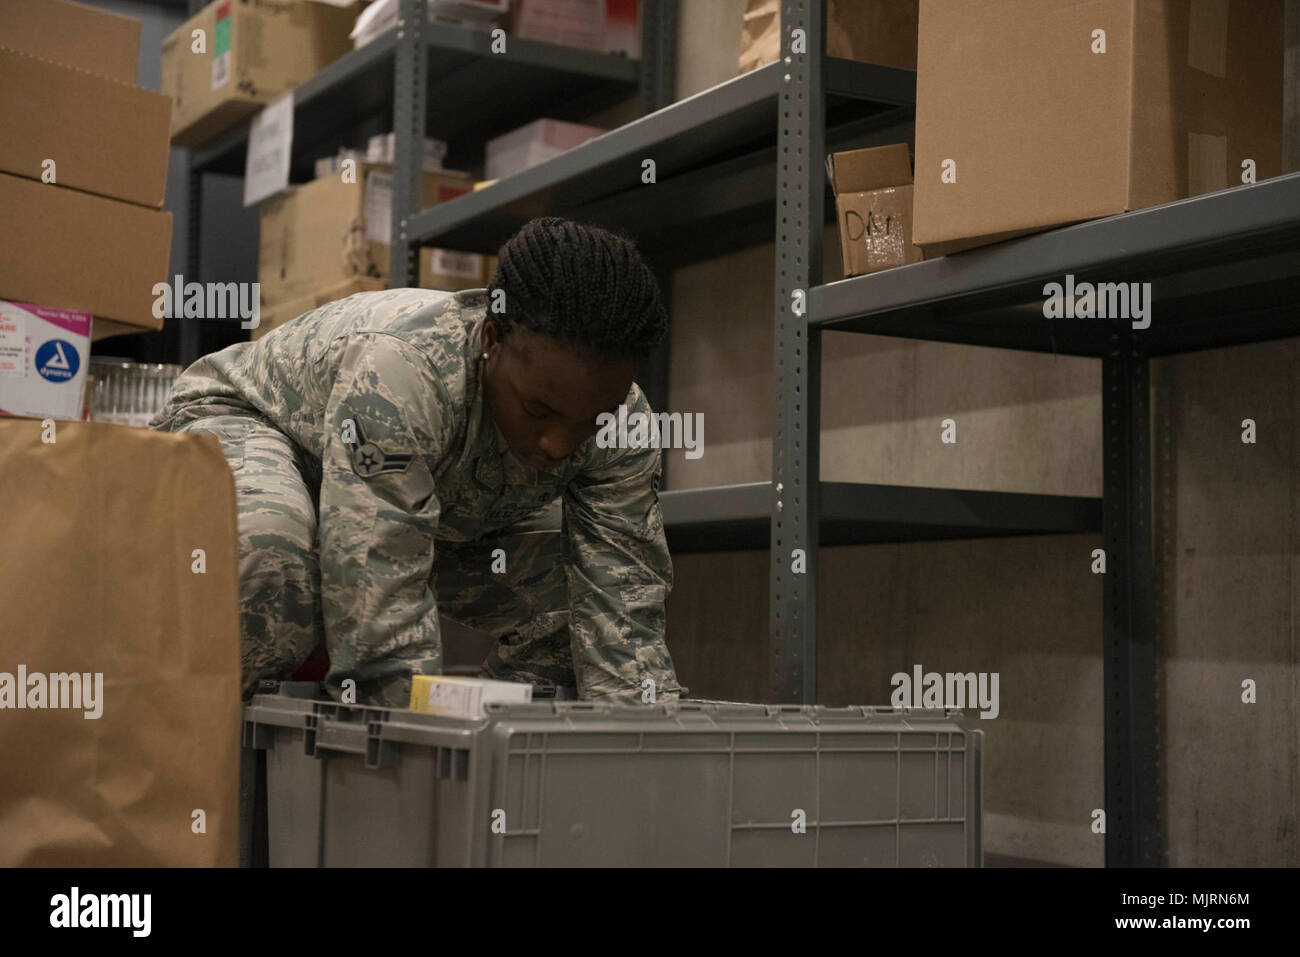 U.S. Air Force Airman 1st Class Ashley Cromwell, 18th Medical Group medical material technician, checks the contents of a crate March 21, 2018, at Kadena Air Base, Japan. Medical materials go through the warehouse managed by the 18th MDG “Log Dogs” before being distributed throughout units both in and outside the medical group building. Armed Forces and civilians displaying courage bravery dedication commitment and sacrifice Stock Photo